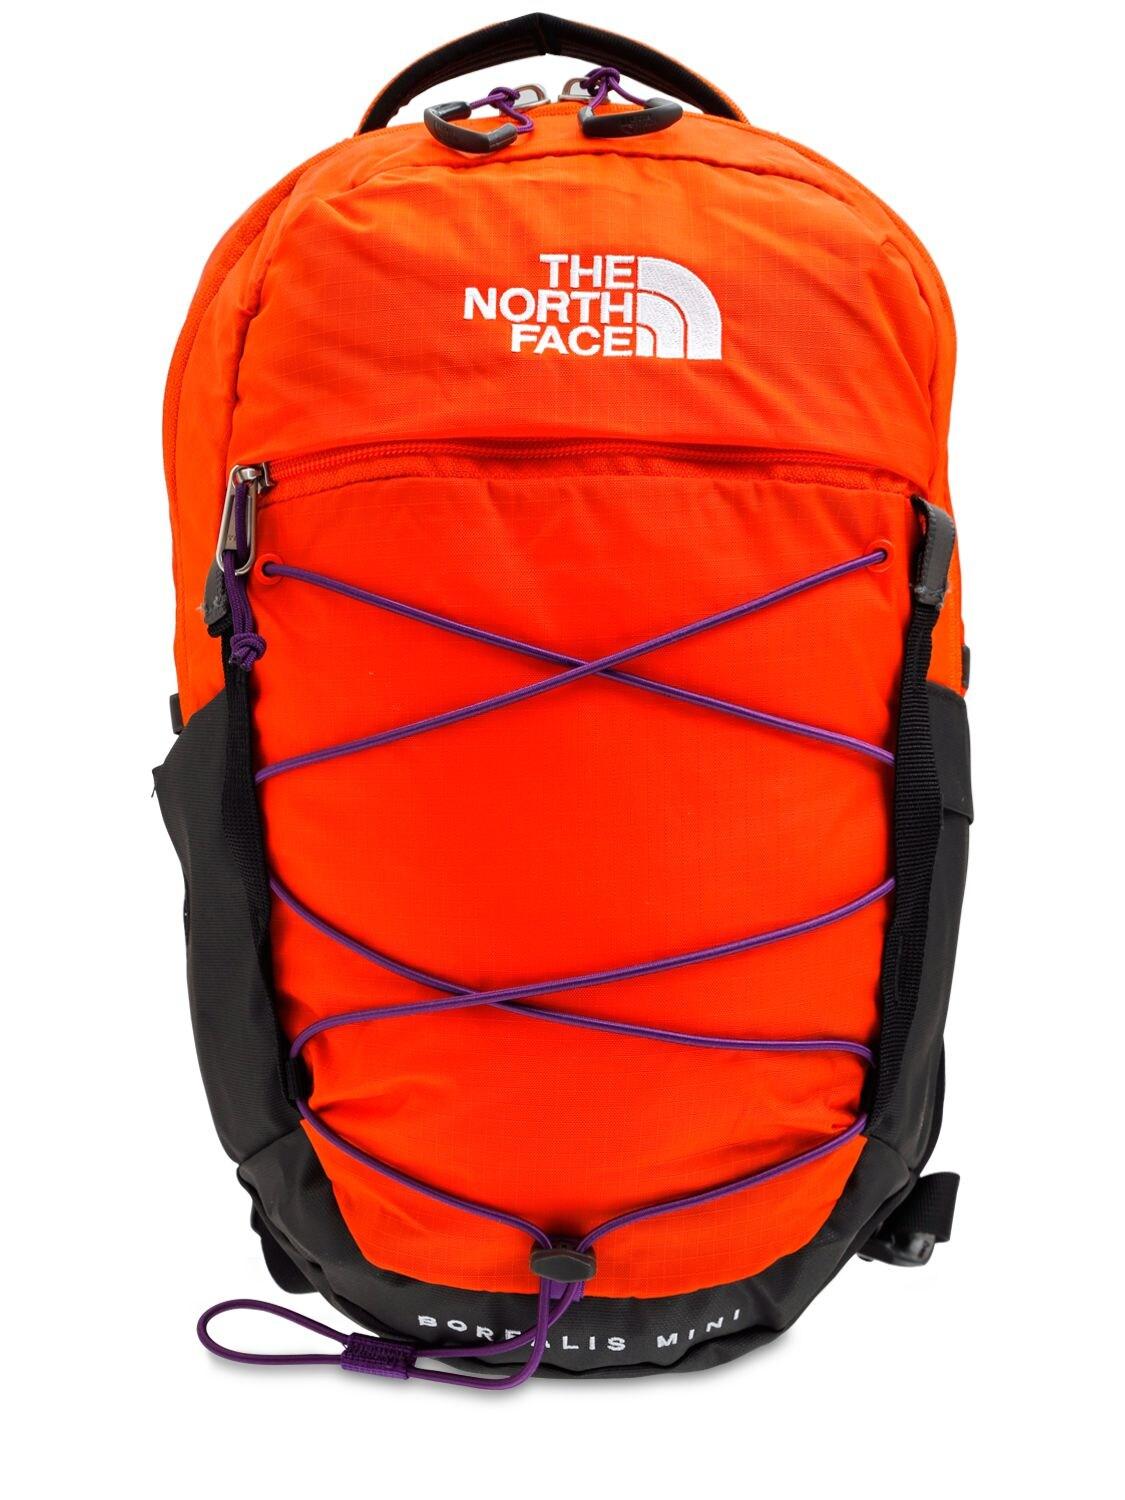 The North Face Mini Borealis Backpack in Red Orange (Red) for Men | Lyst